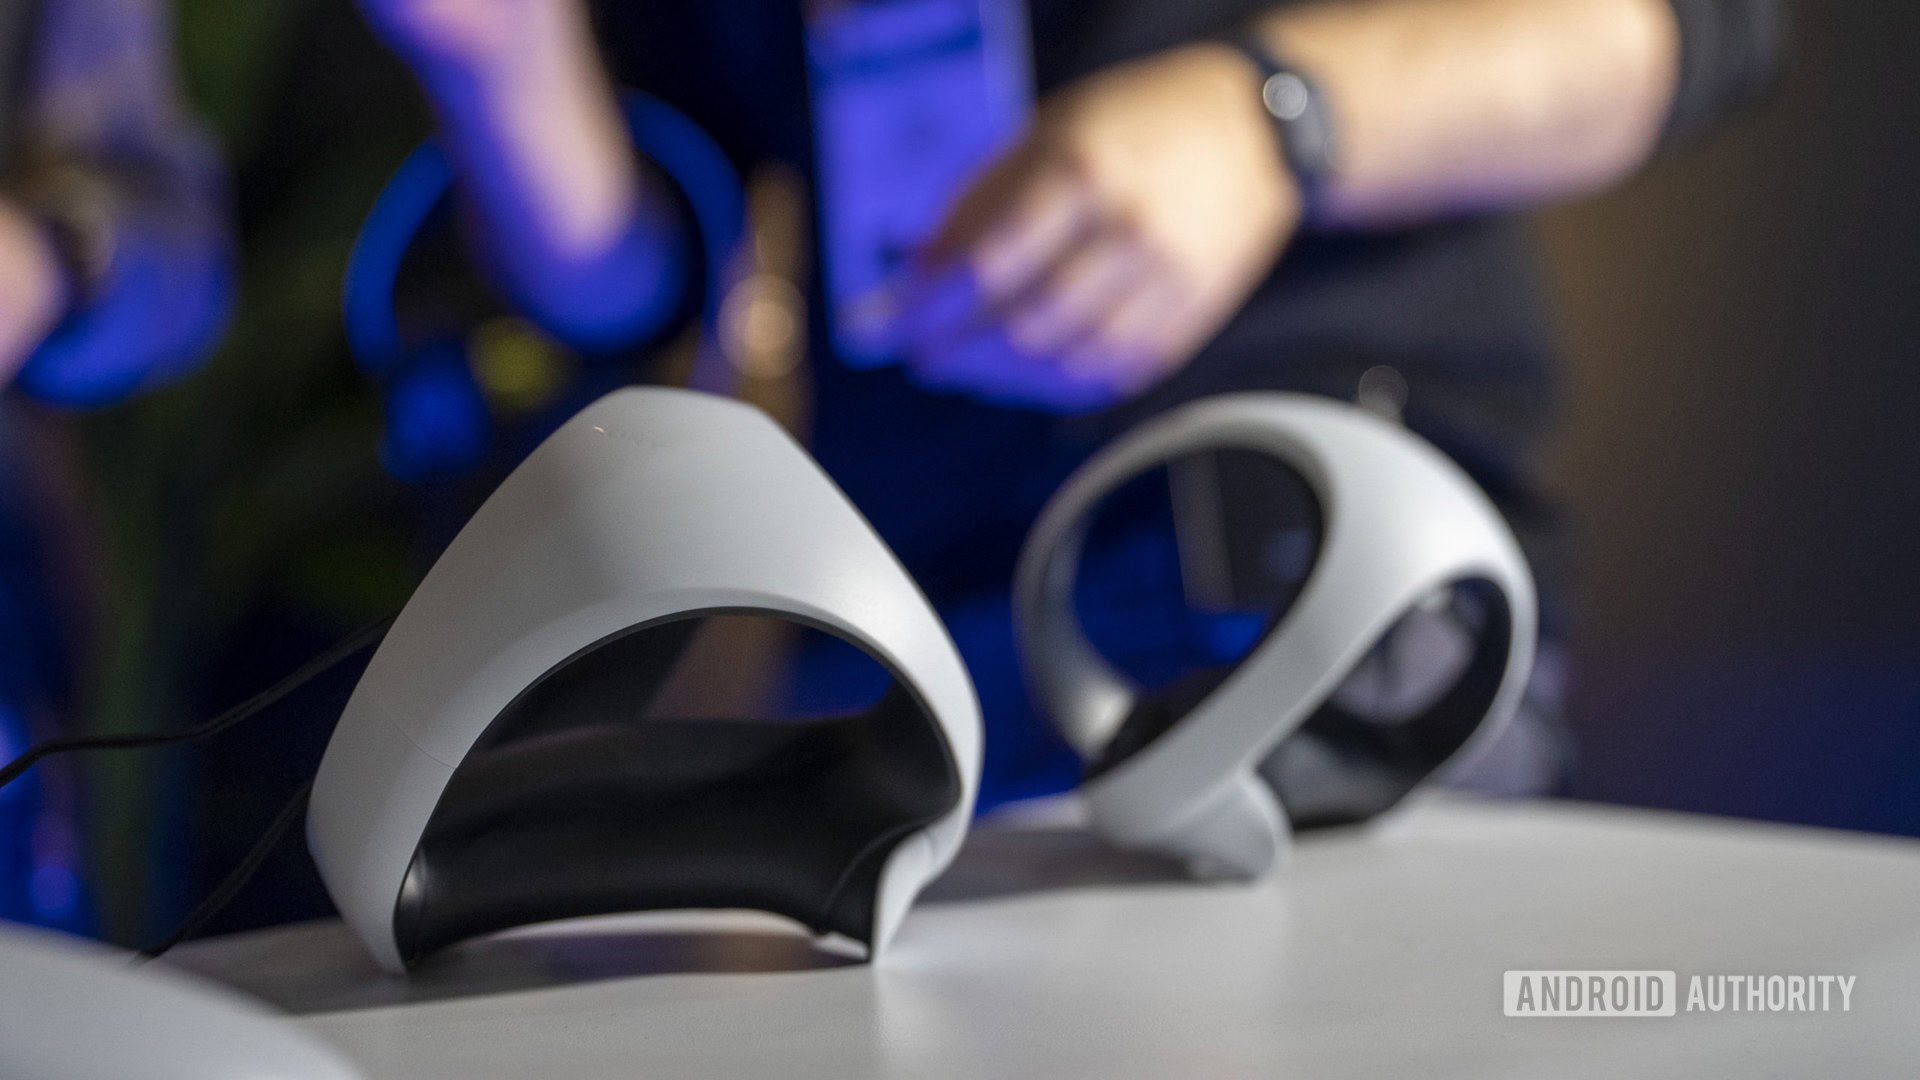 PlayStation VR 2 hands-on: Sony's second stab at VR 